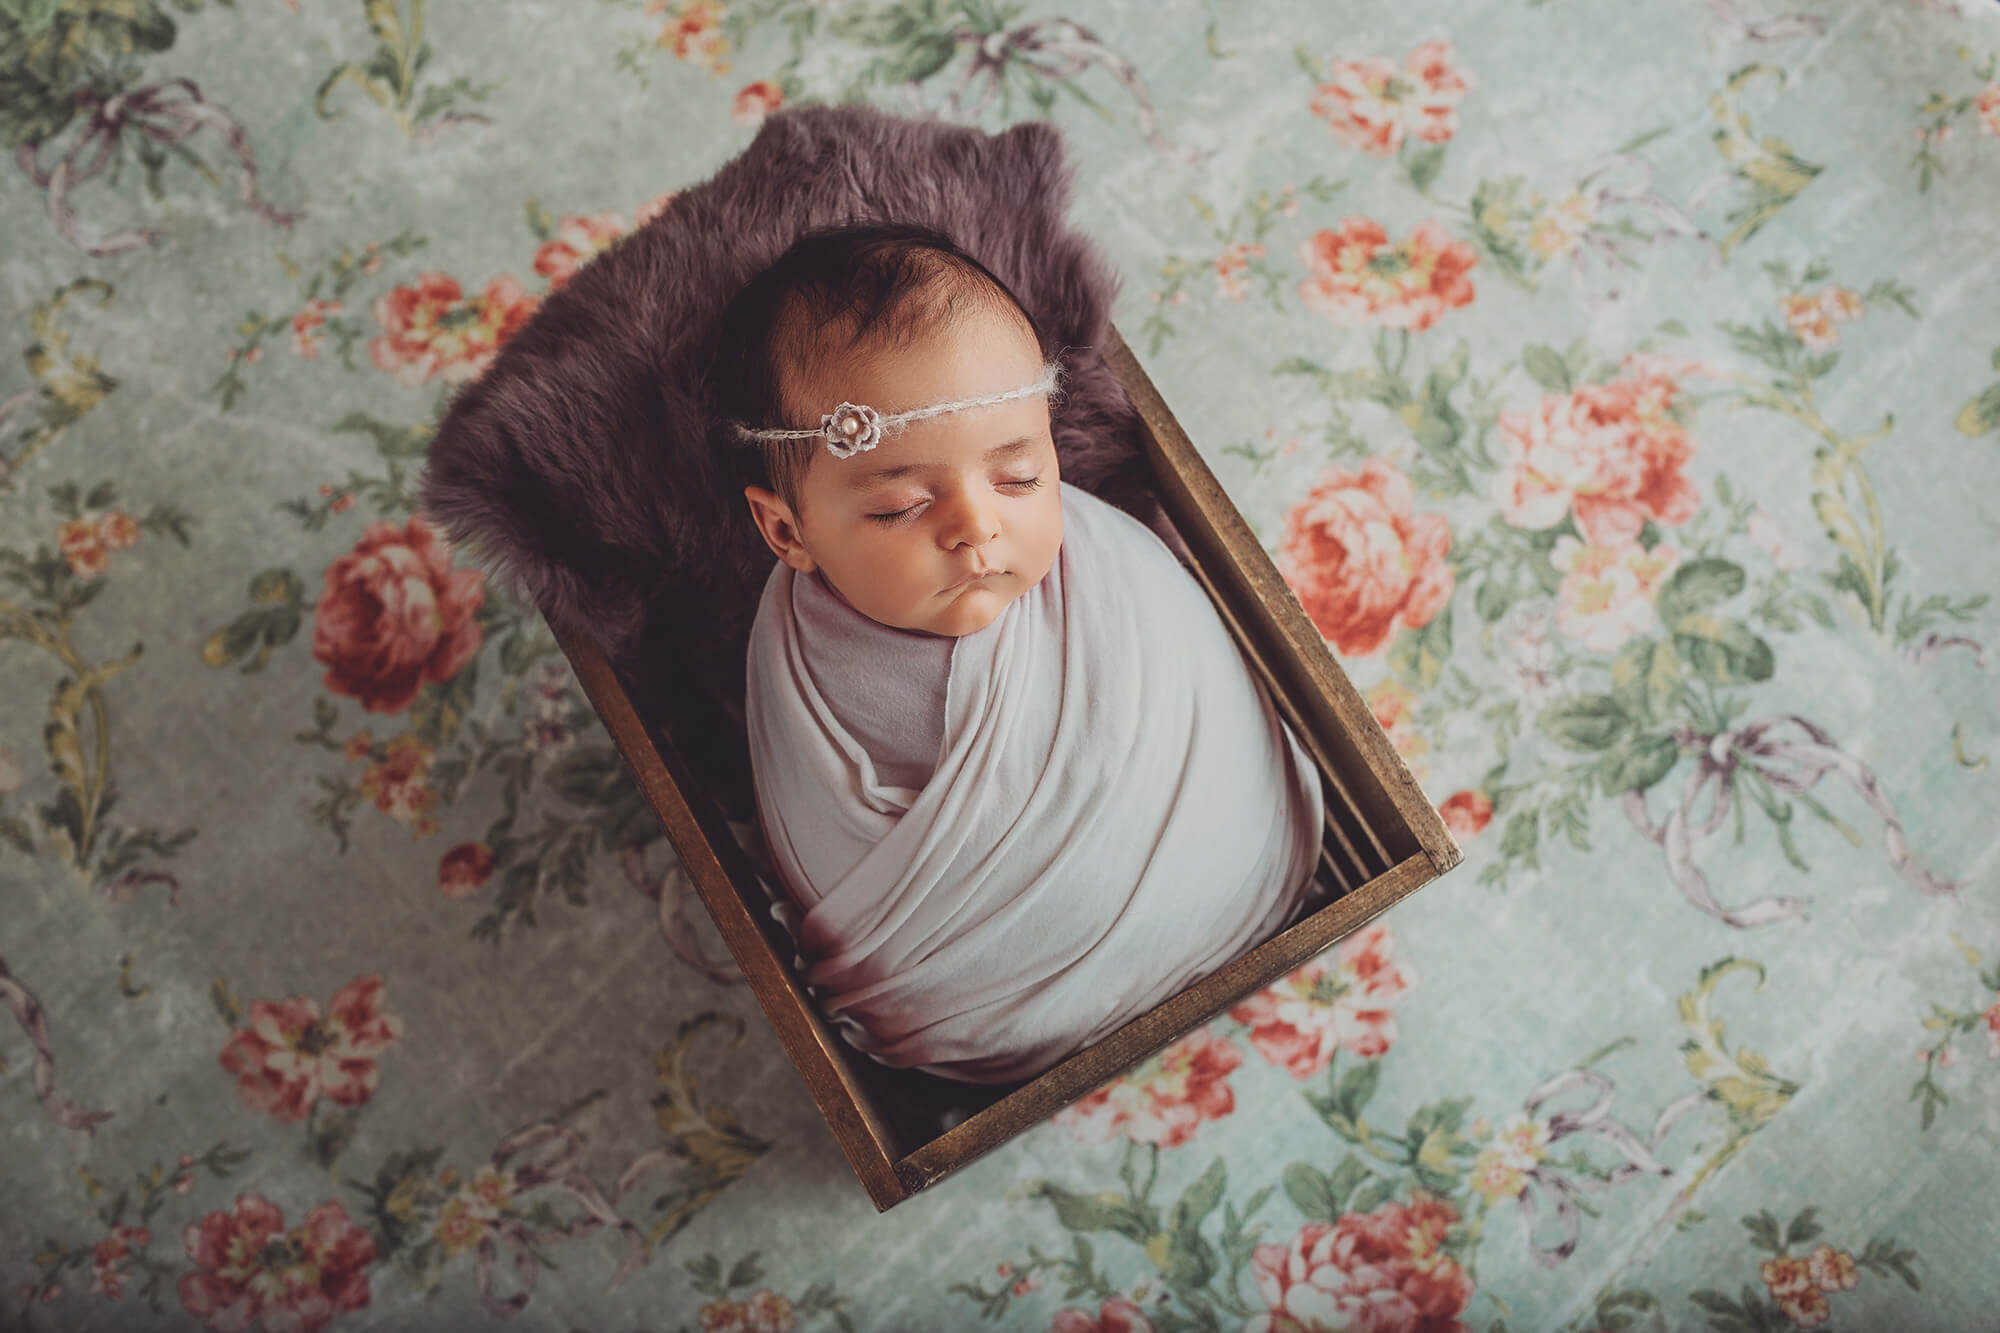 Newborn baby Amelia wrapped in a lavender wrap in a wooden crate with lavender fur on a pink floral backdrop